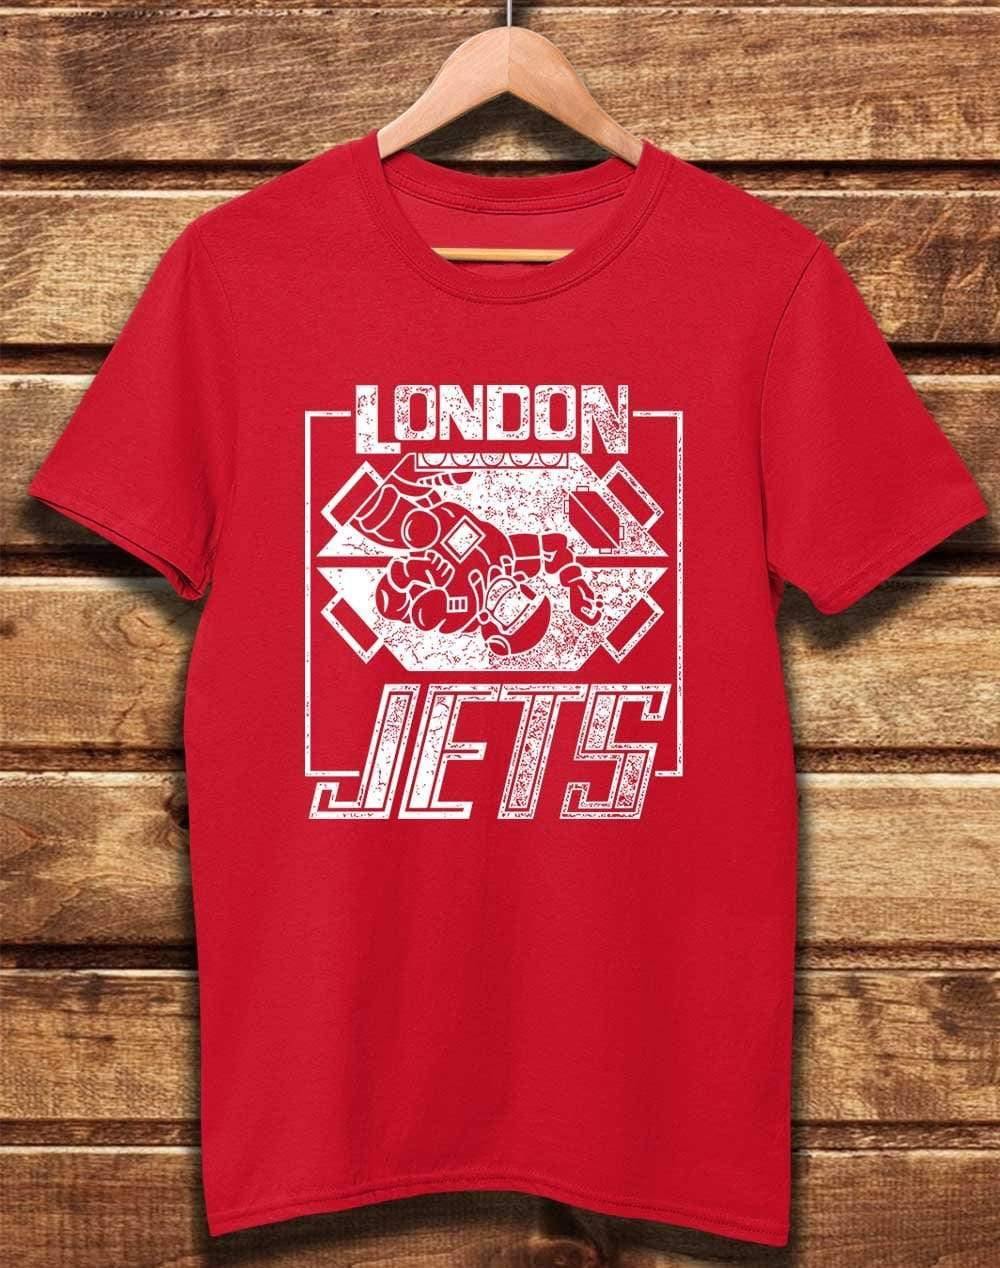 DELUXE London Jets Organic Cotton T-Shirt XS / Red  - Off World Tees